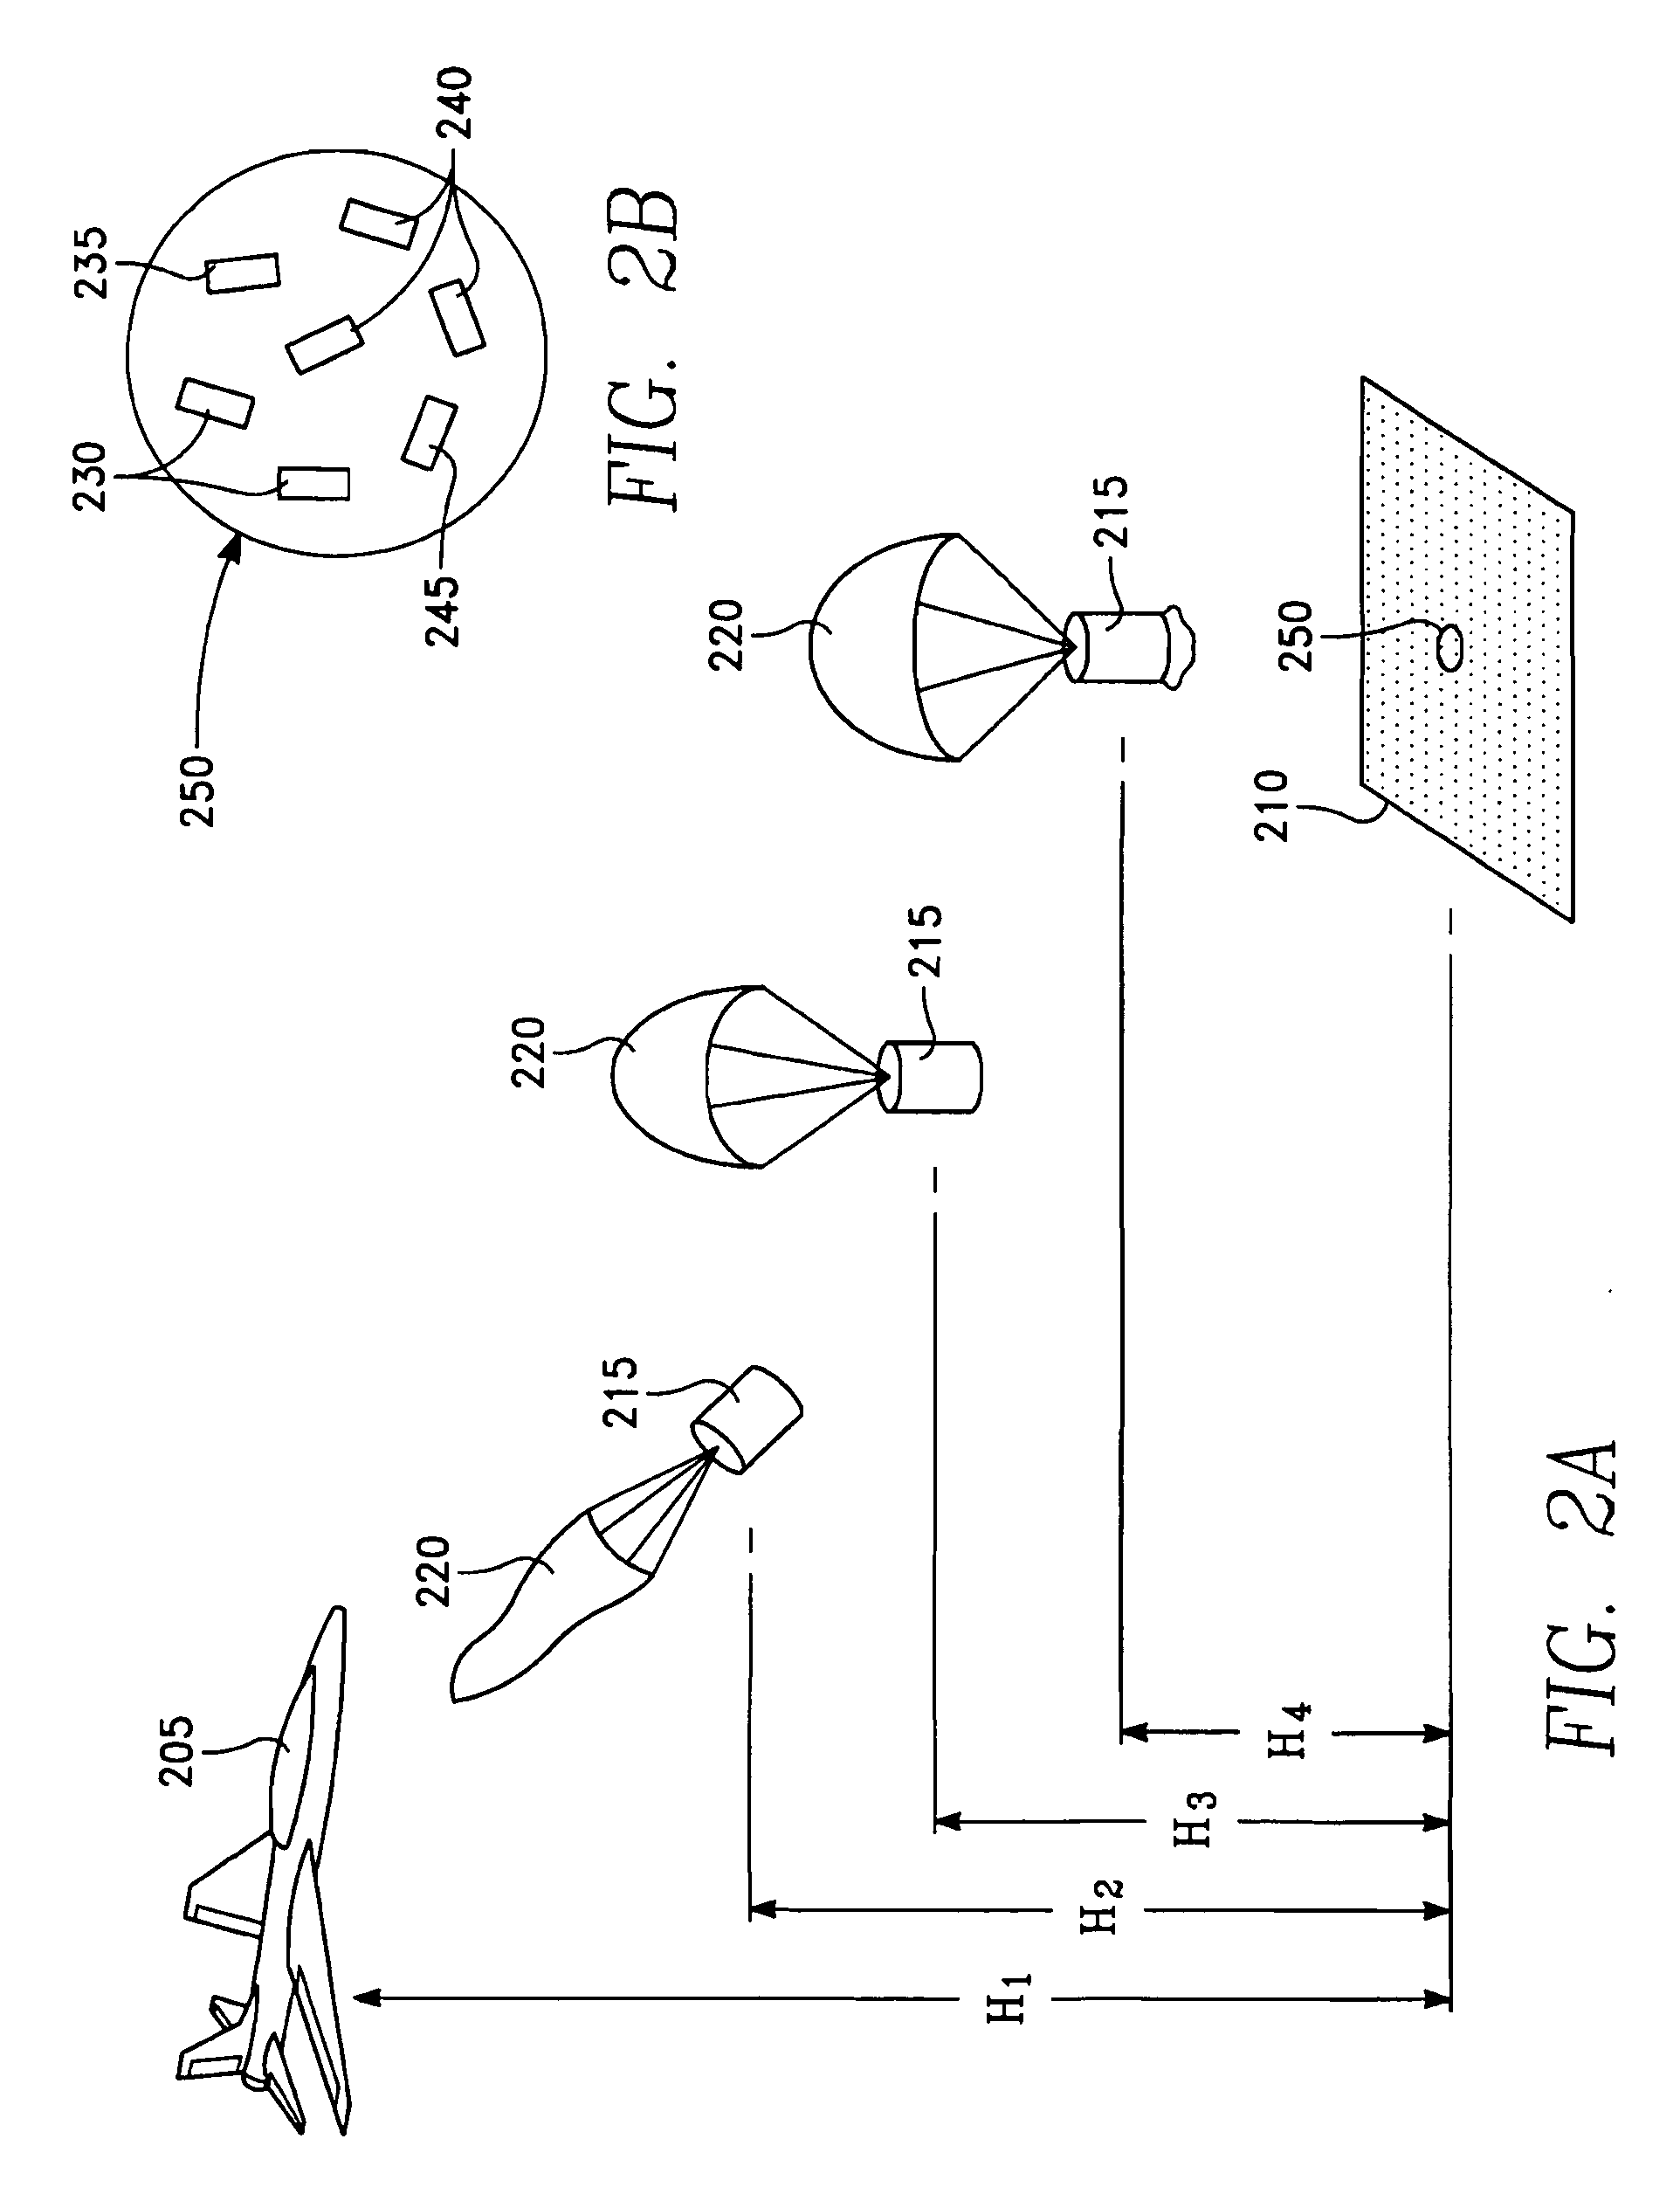 Airborne Deployed Radio Frequency Identification Sensing System to Detect an Analyte